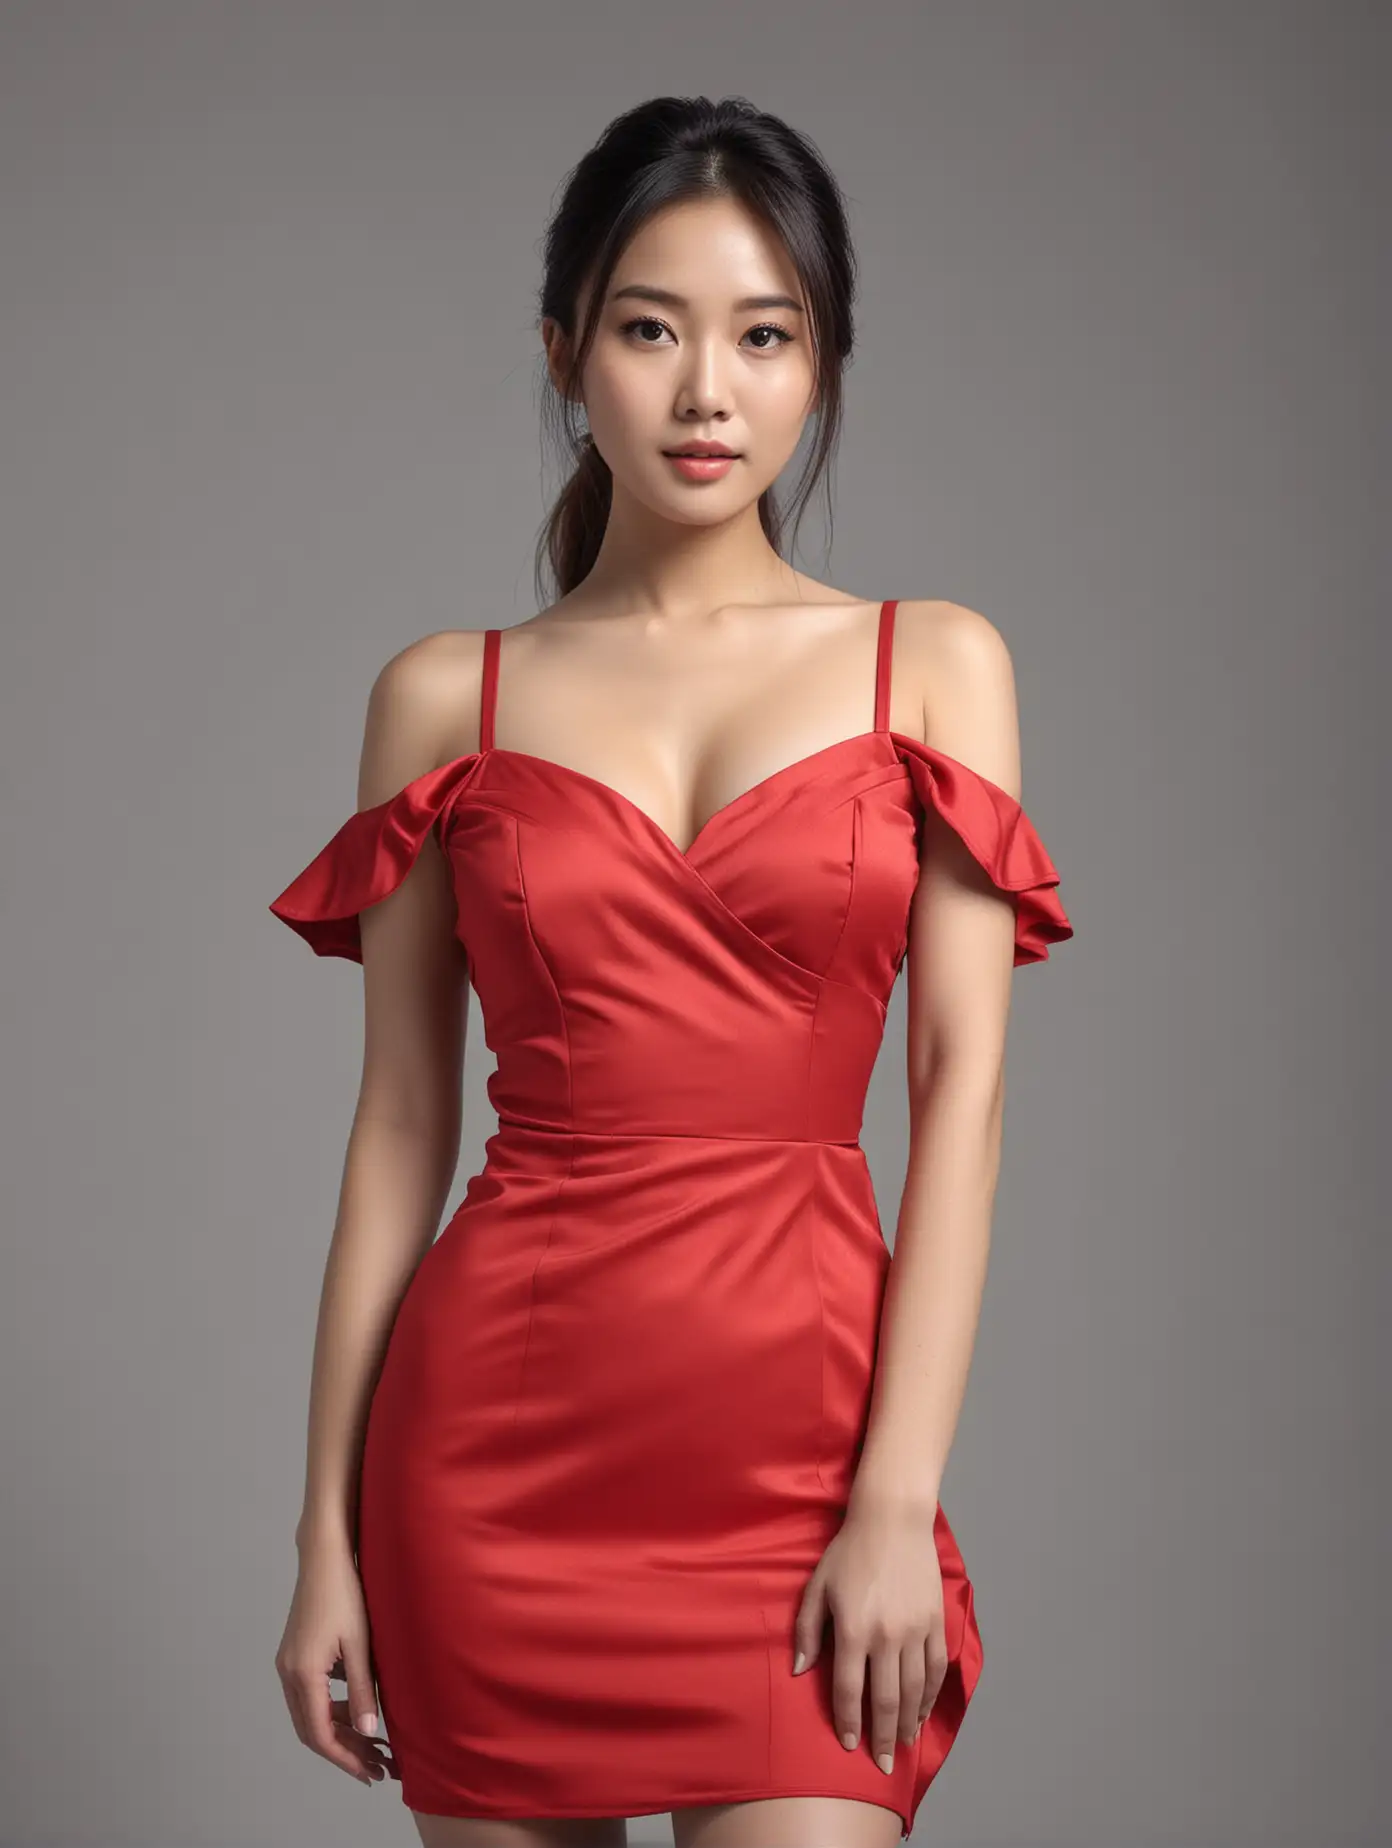 Asian Woman in Stunning Cherry Red Dress on Monochrome Background